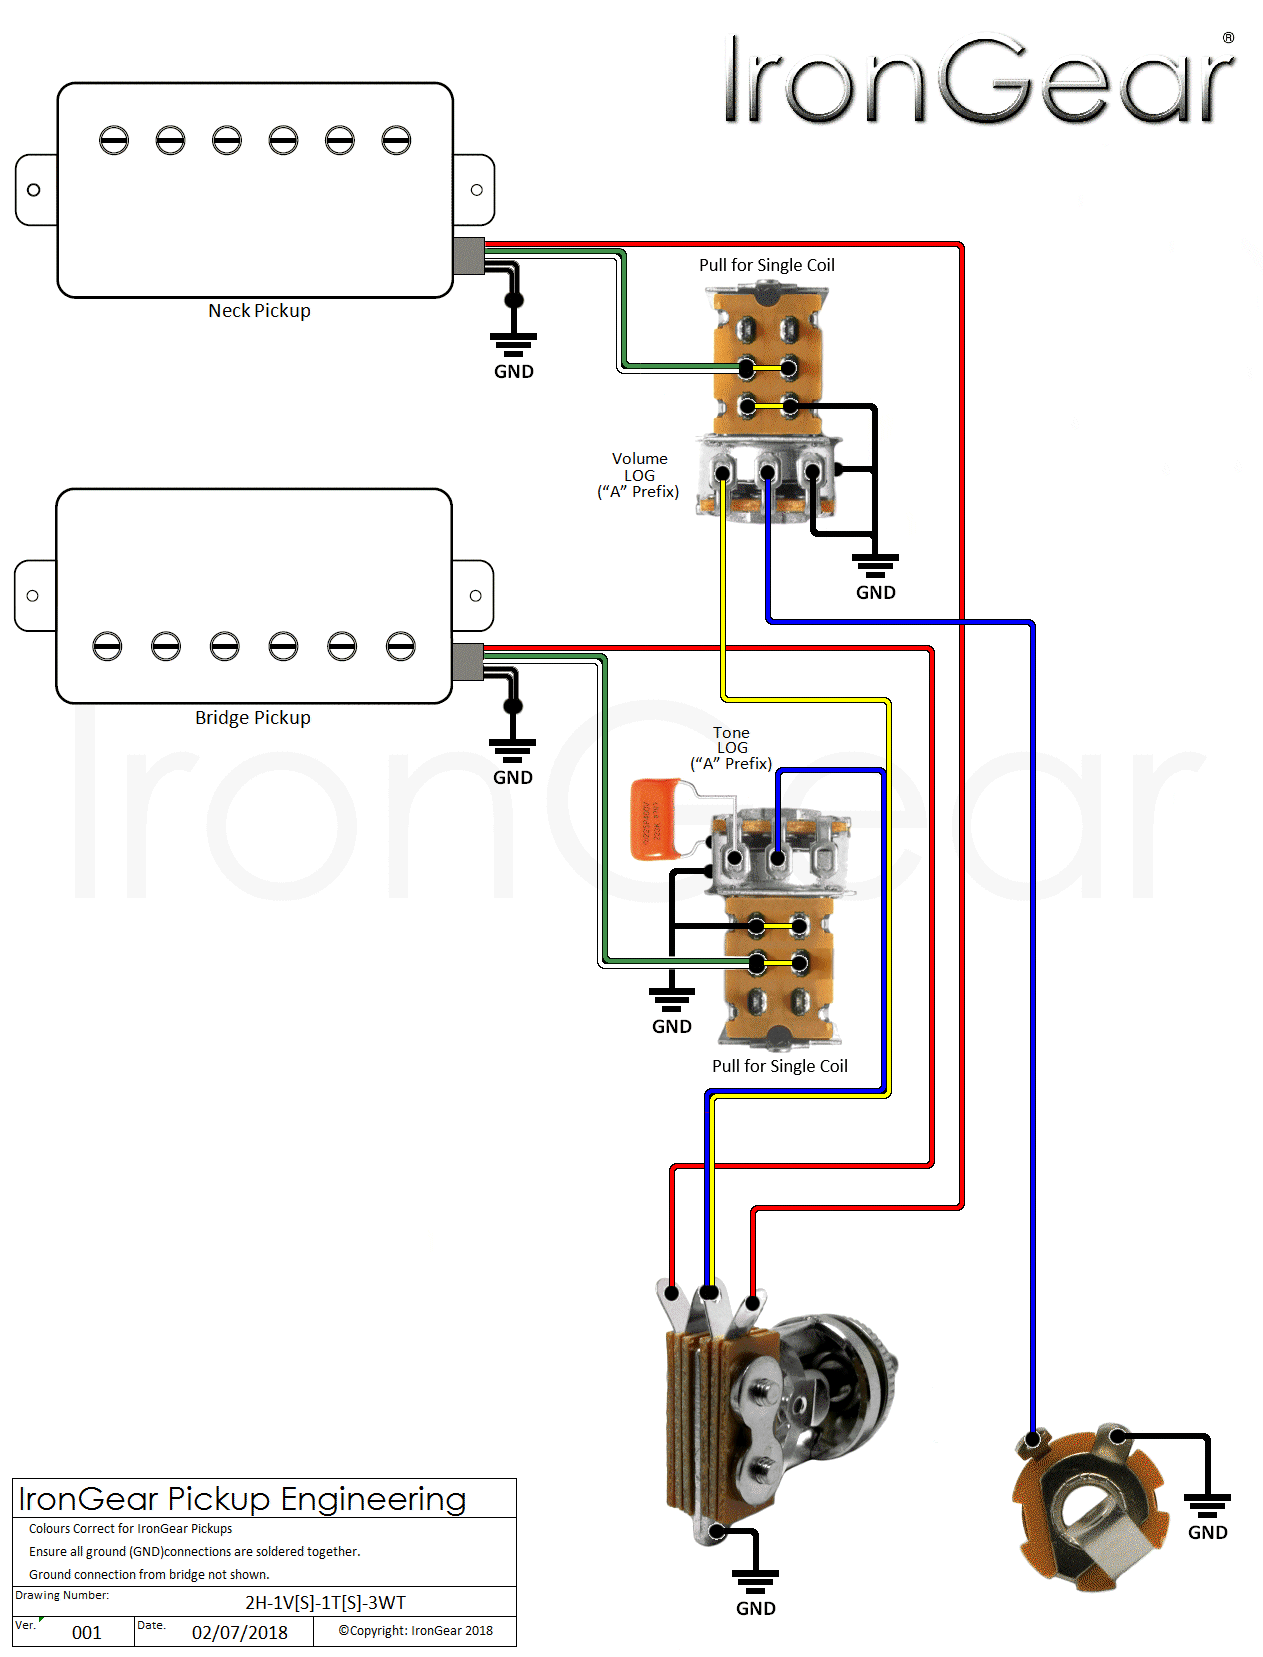 3 Way Toggle Switch Wiring Diagram from www.irongear.co.uk